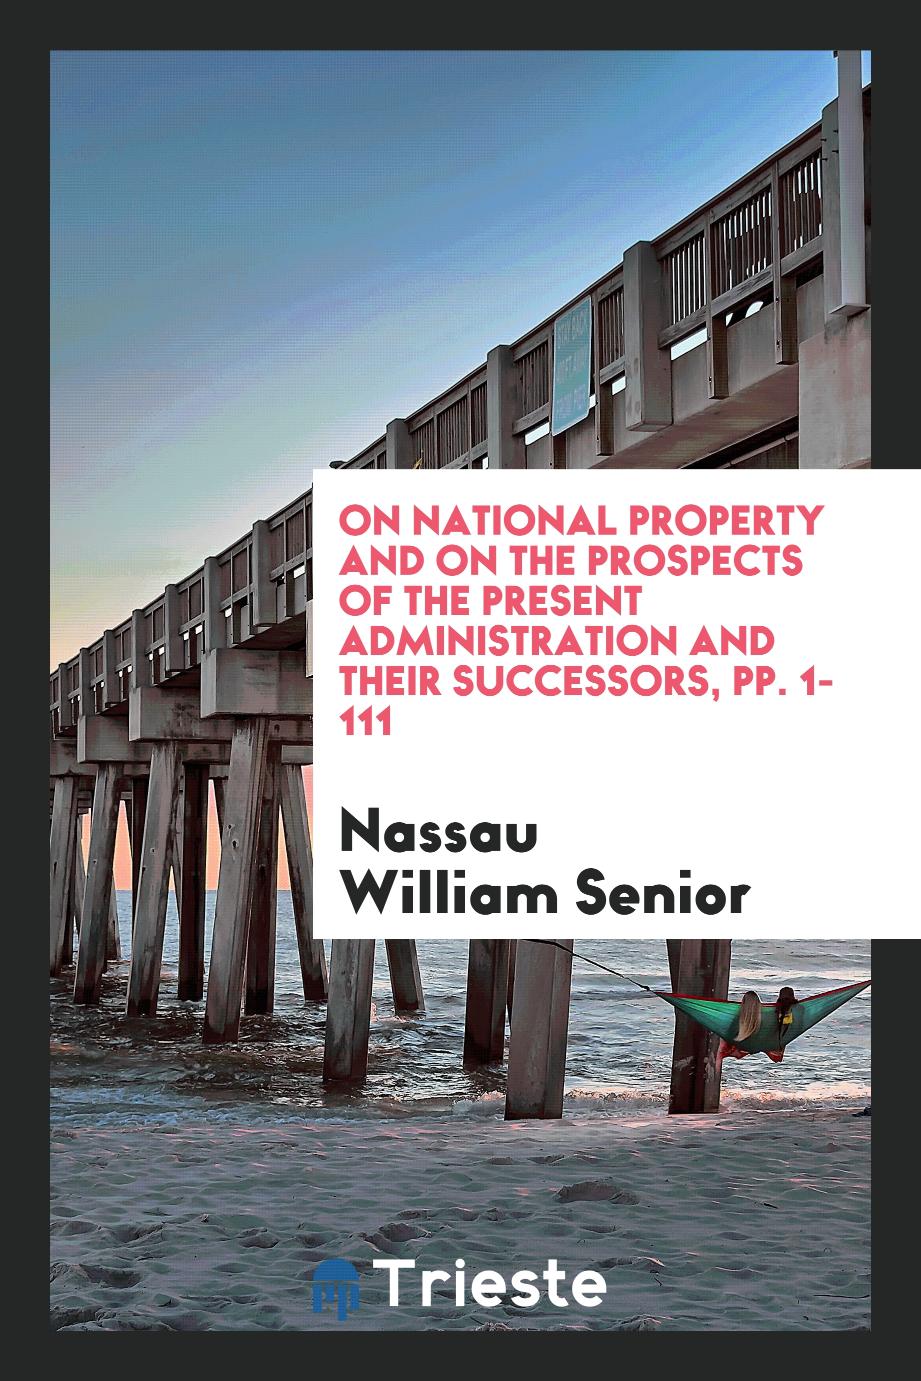 On National Property and on the Prospects of the Present Administration and Their Successors, pp. 1-111